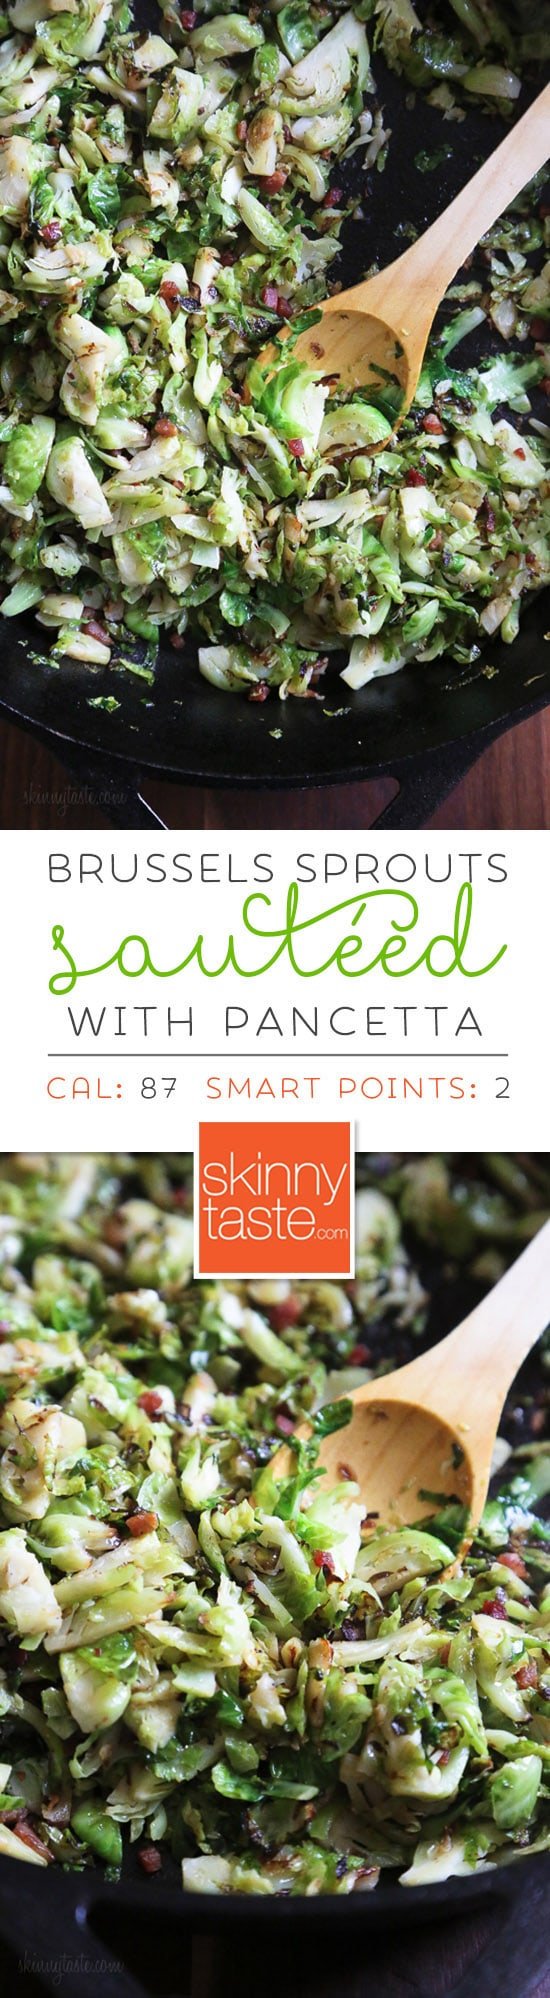 Sauteed brussels sprouts are delicious when shredded and sautéed with pancetta (or bacon), garlic and oil. If you don't think you like Brussels sprouts, I challenge you to try these! Lightly pan fried until crisp and slightly browned on the edges, this is my favorite way to cook and eat them!